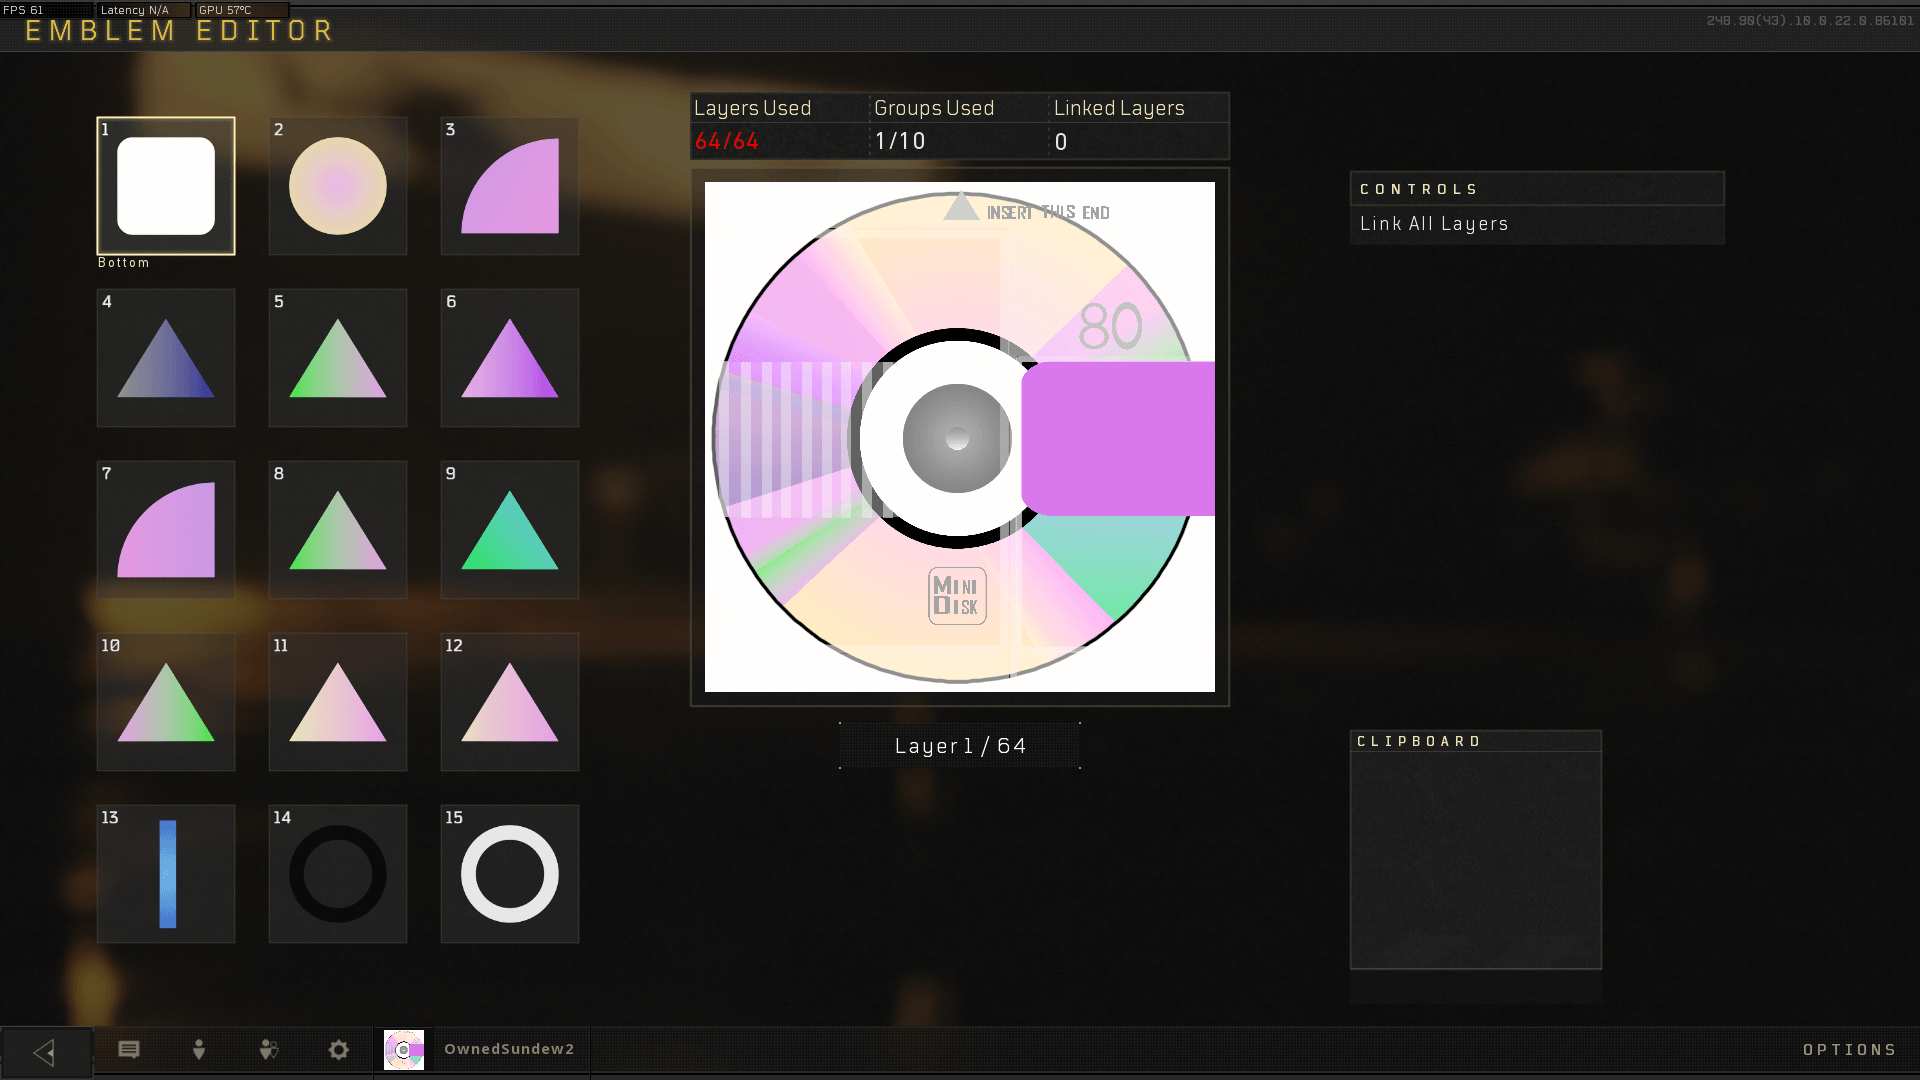 Official Bo4 Logo - Saw some BO4 emblems being posted, this is my Yandhi emblem!